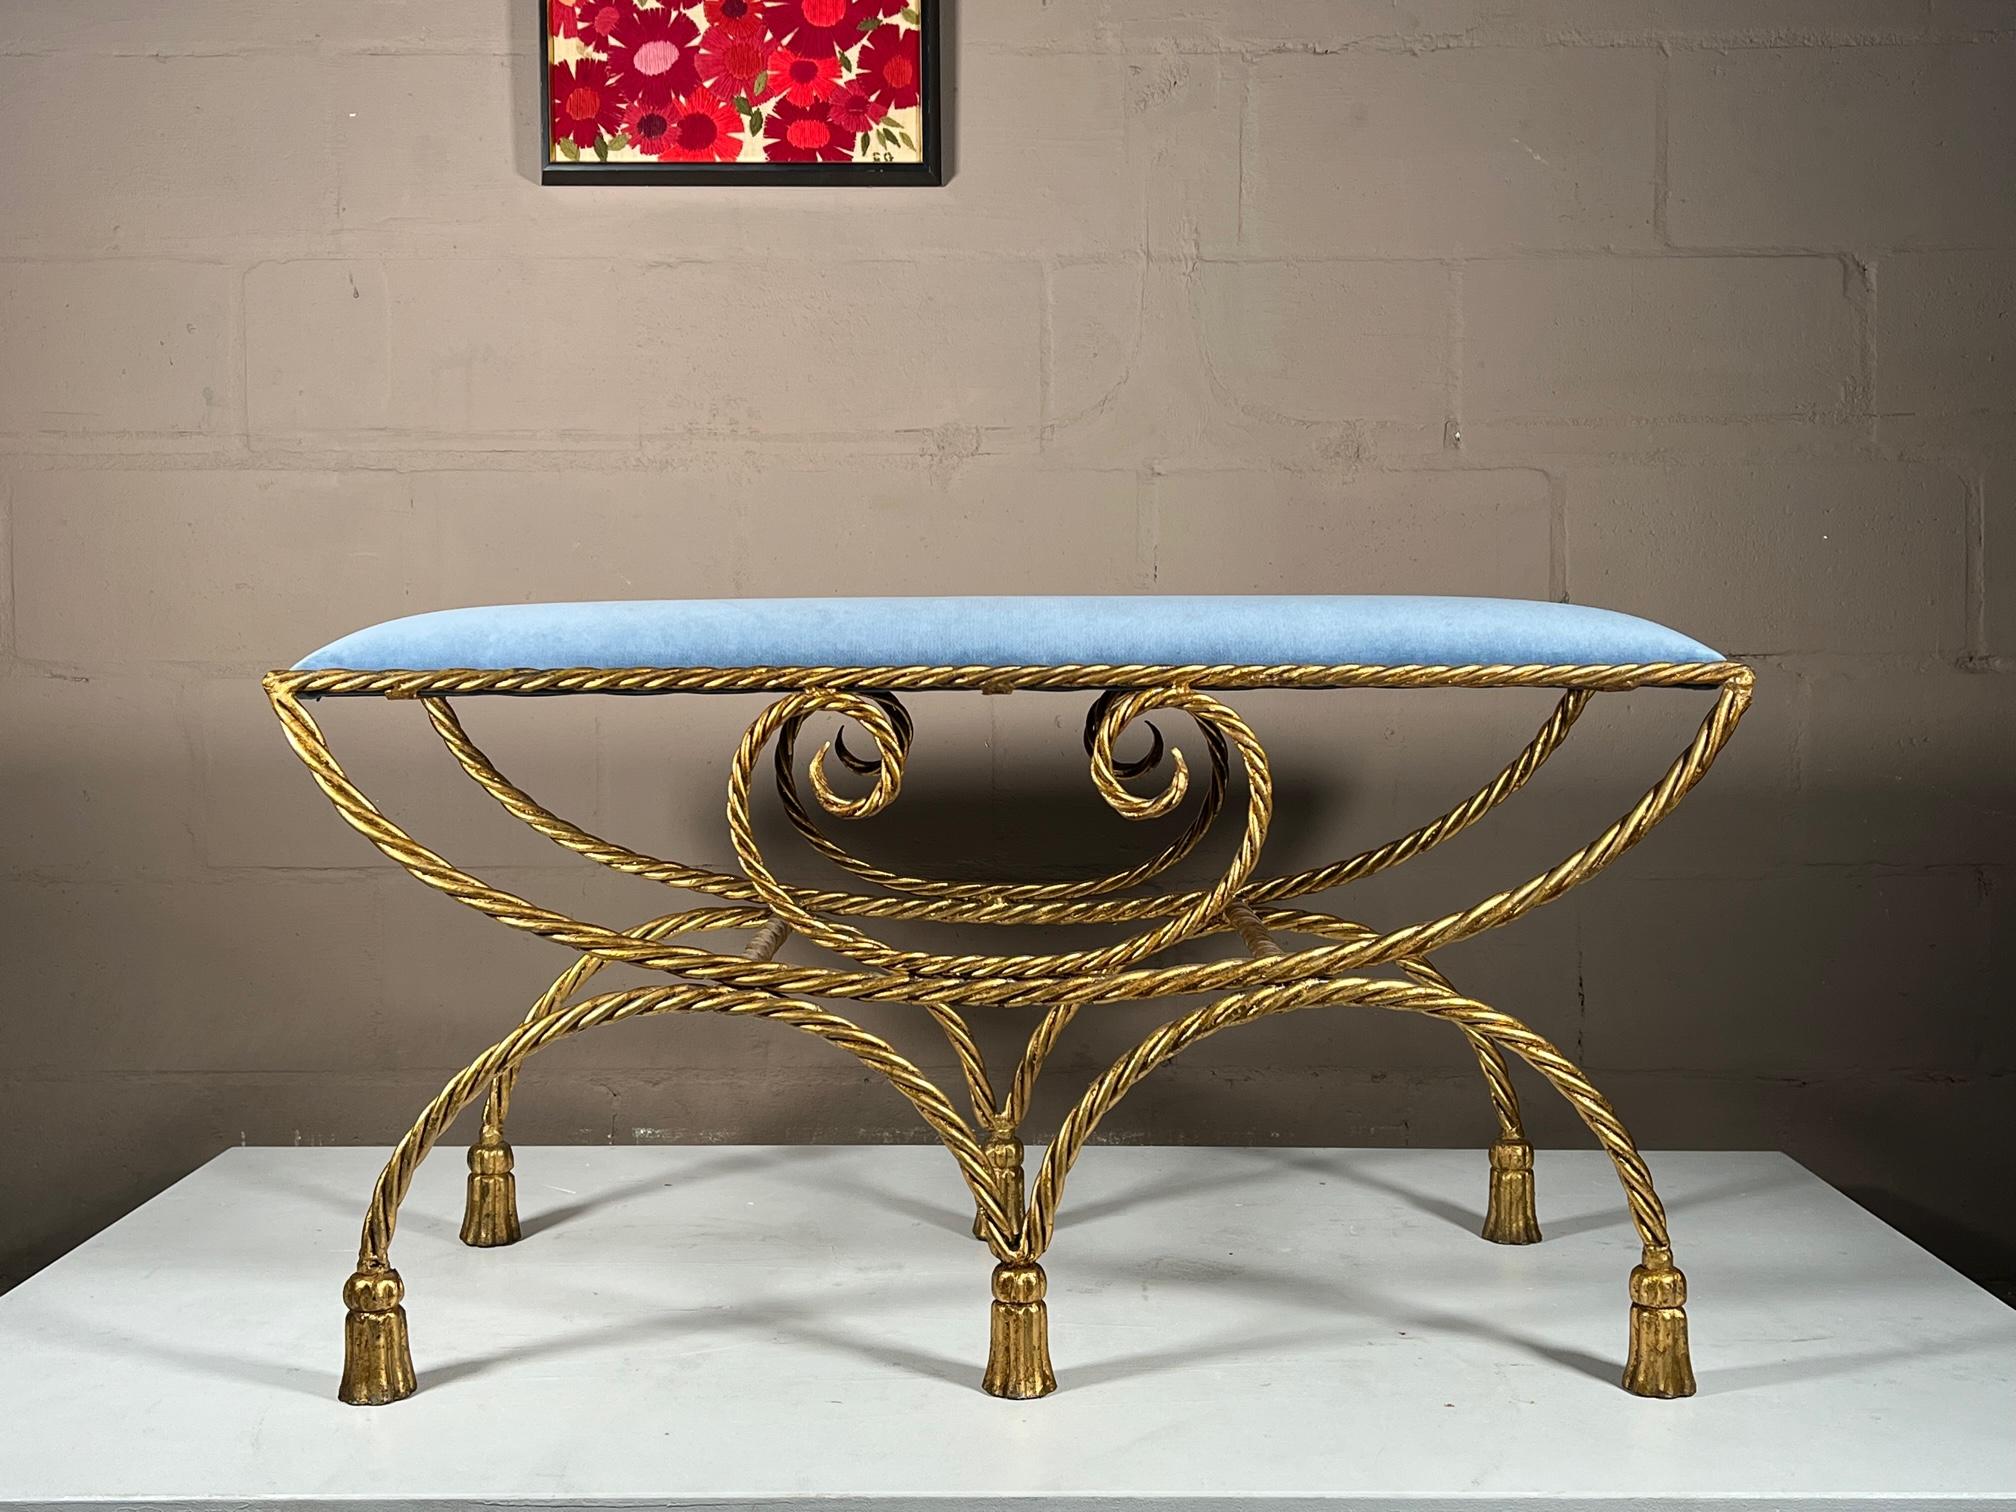 A great example of Italian Hollywood Regency bench. Gilt metal, twisted rope and tassel feet. Reupholstered in blue silk velvet-the color changes depending on light and angle. This bench is heavy and well made.